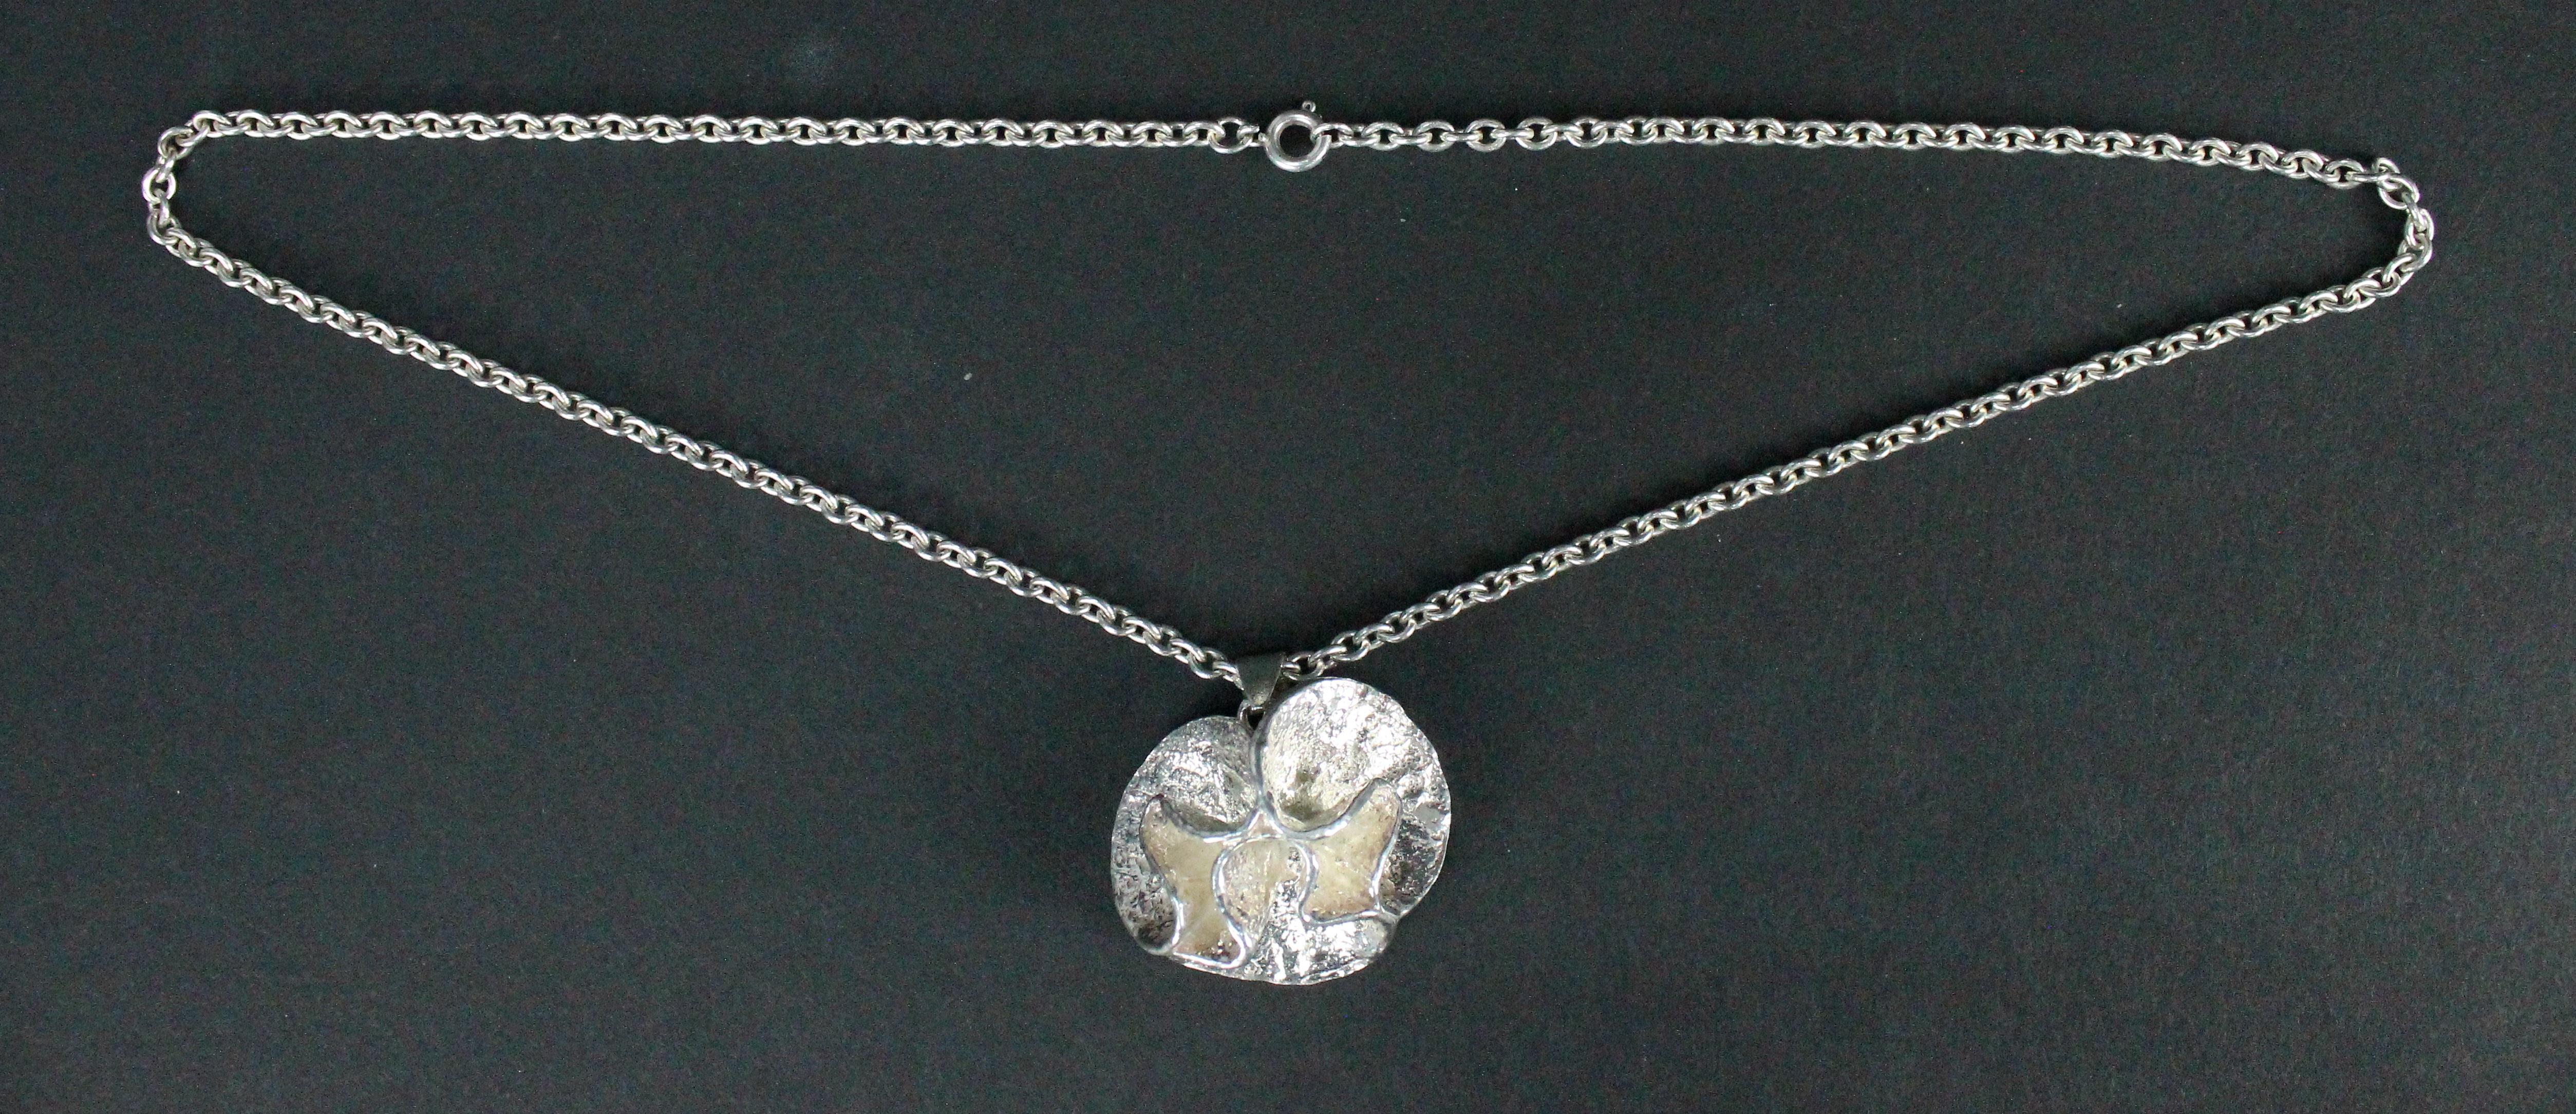 Women's Theresia Hvorslev Pendant Sterling Silver 1976 Necklace For Sale